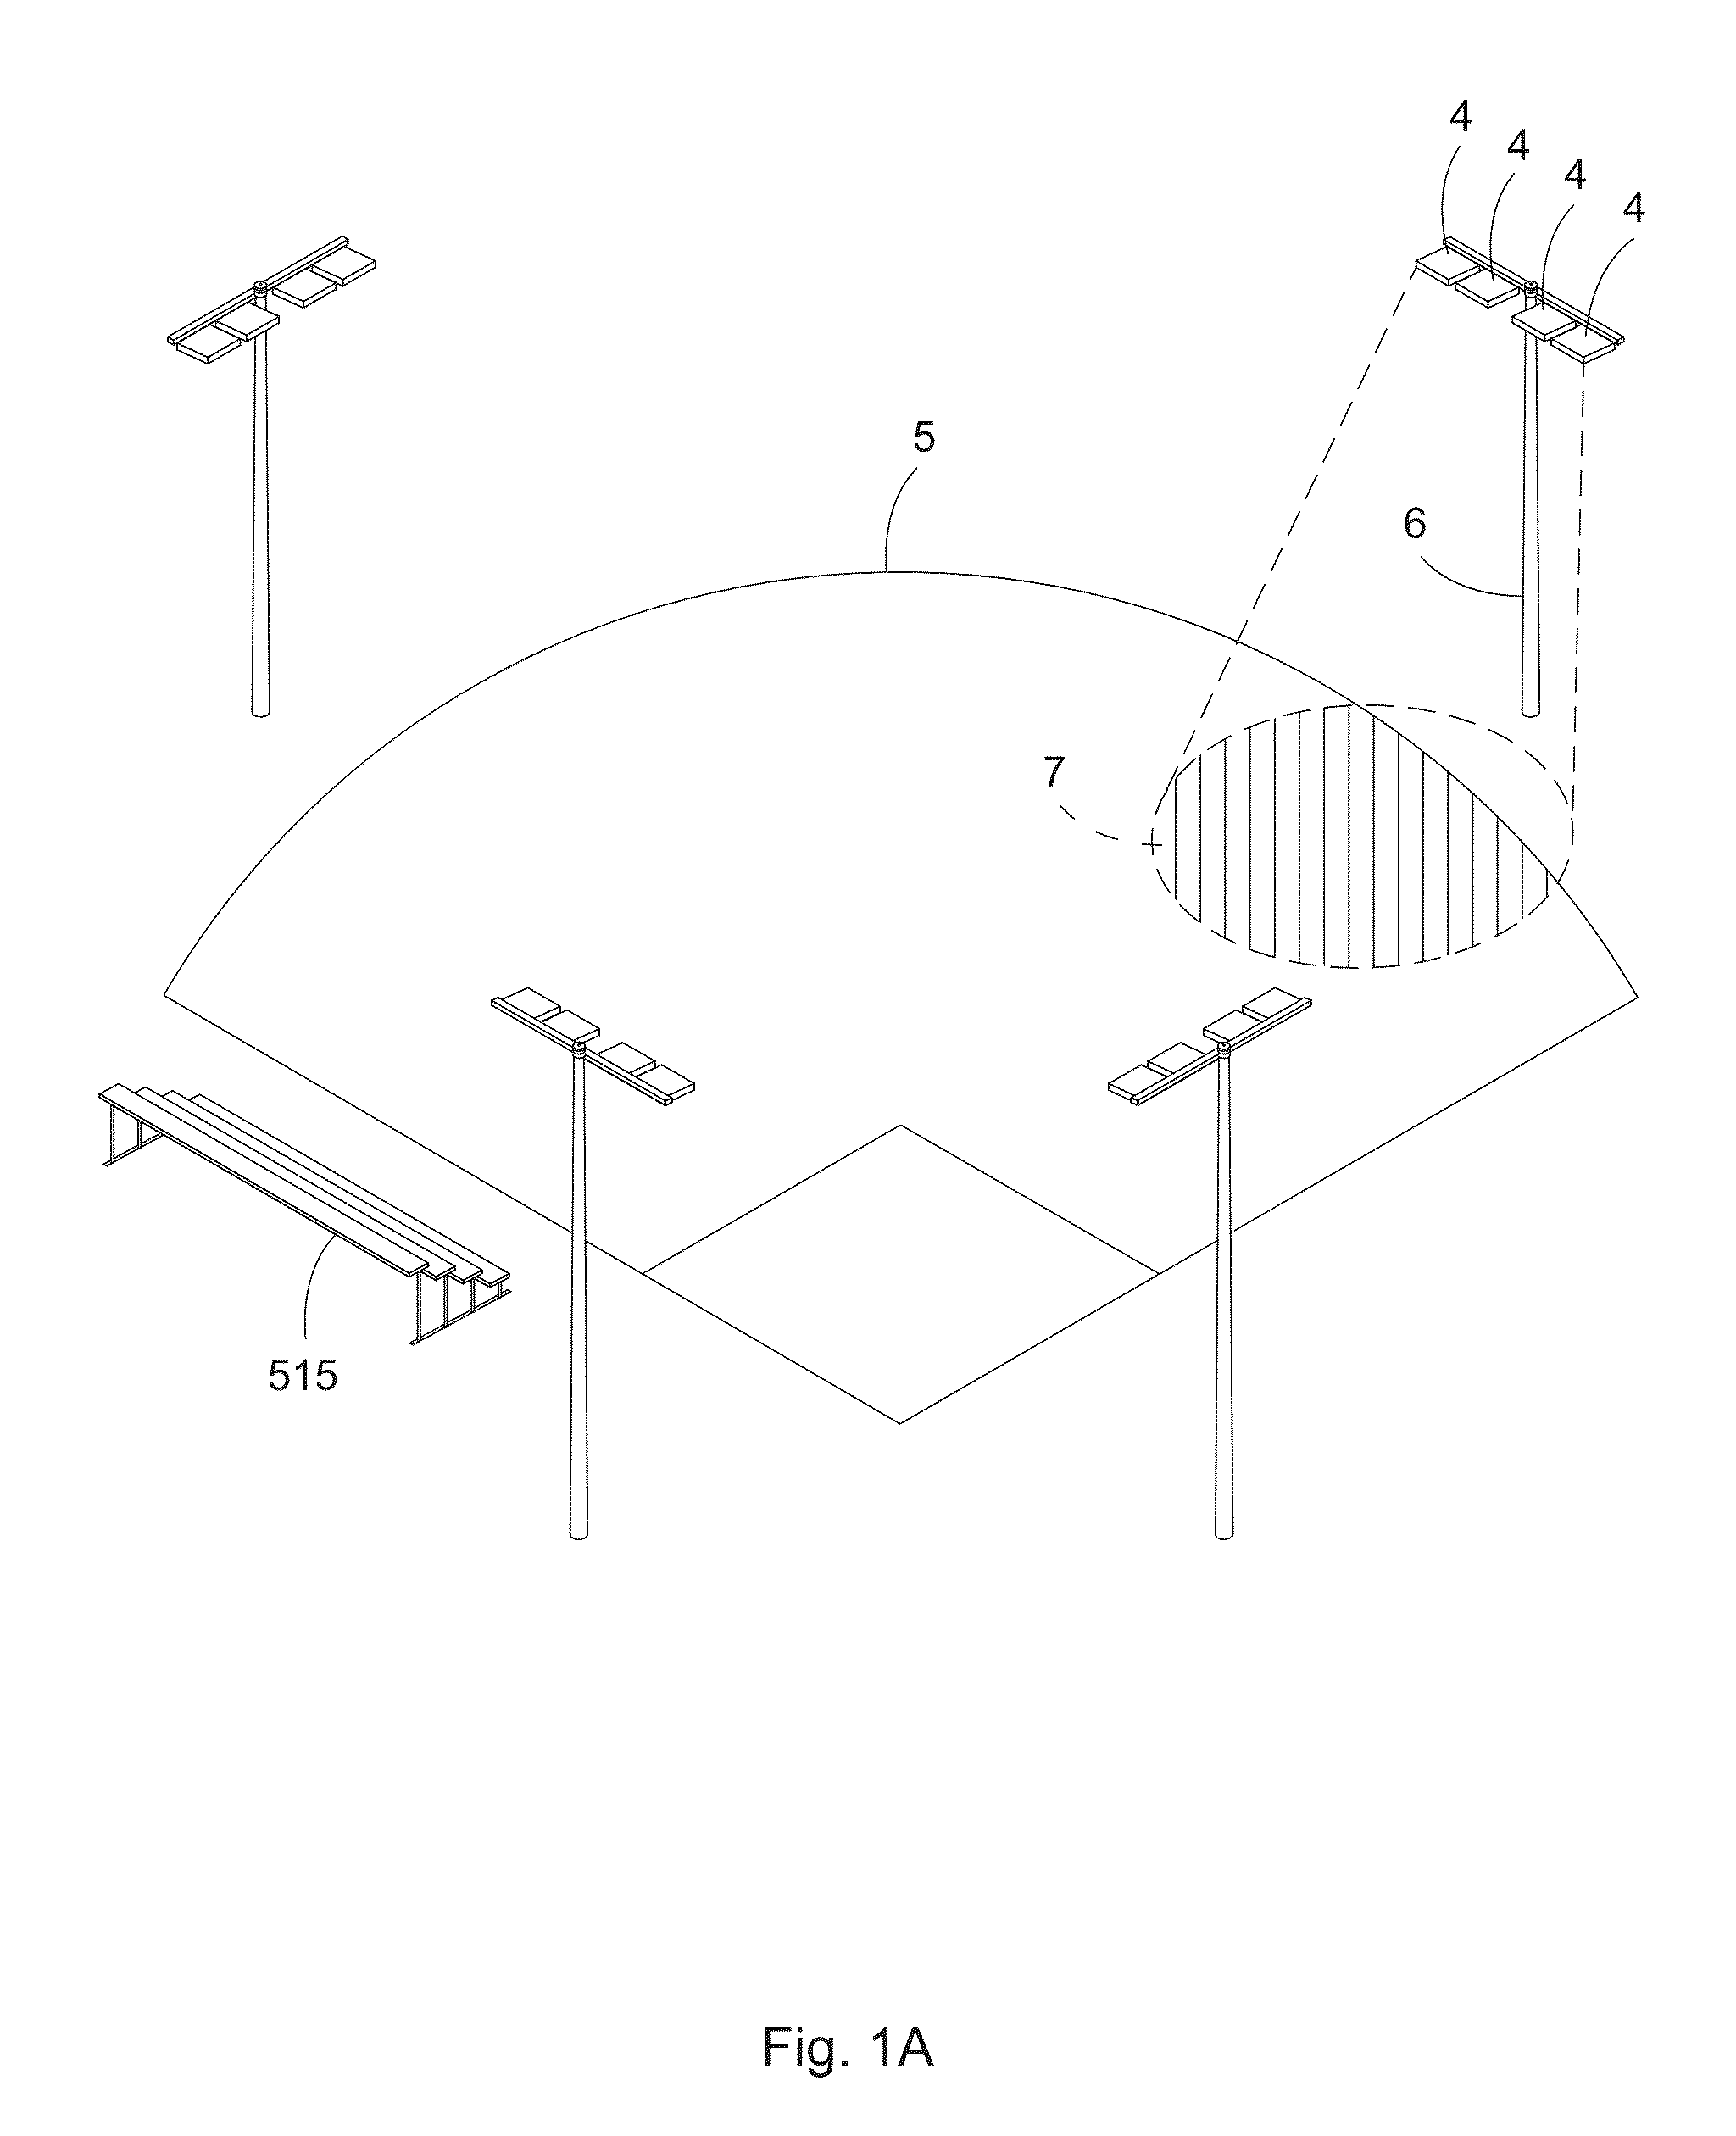 Apparatus, method, and system for independent aiming and cutoff steps in illuminating a target area